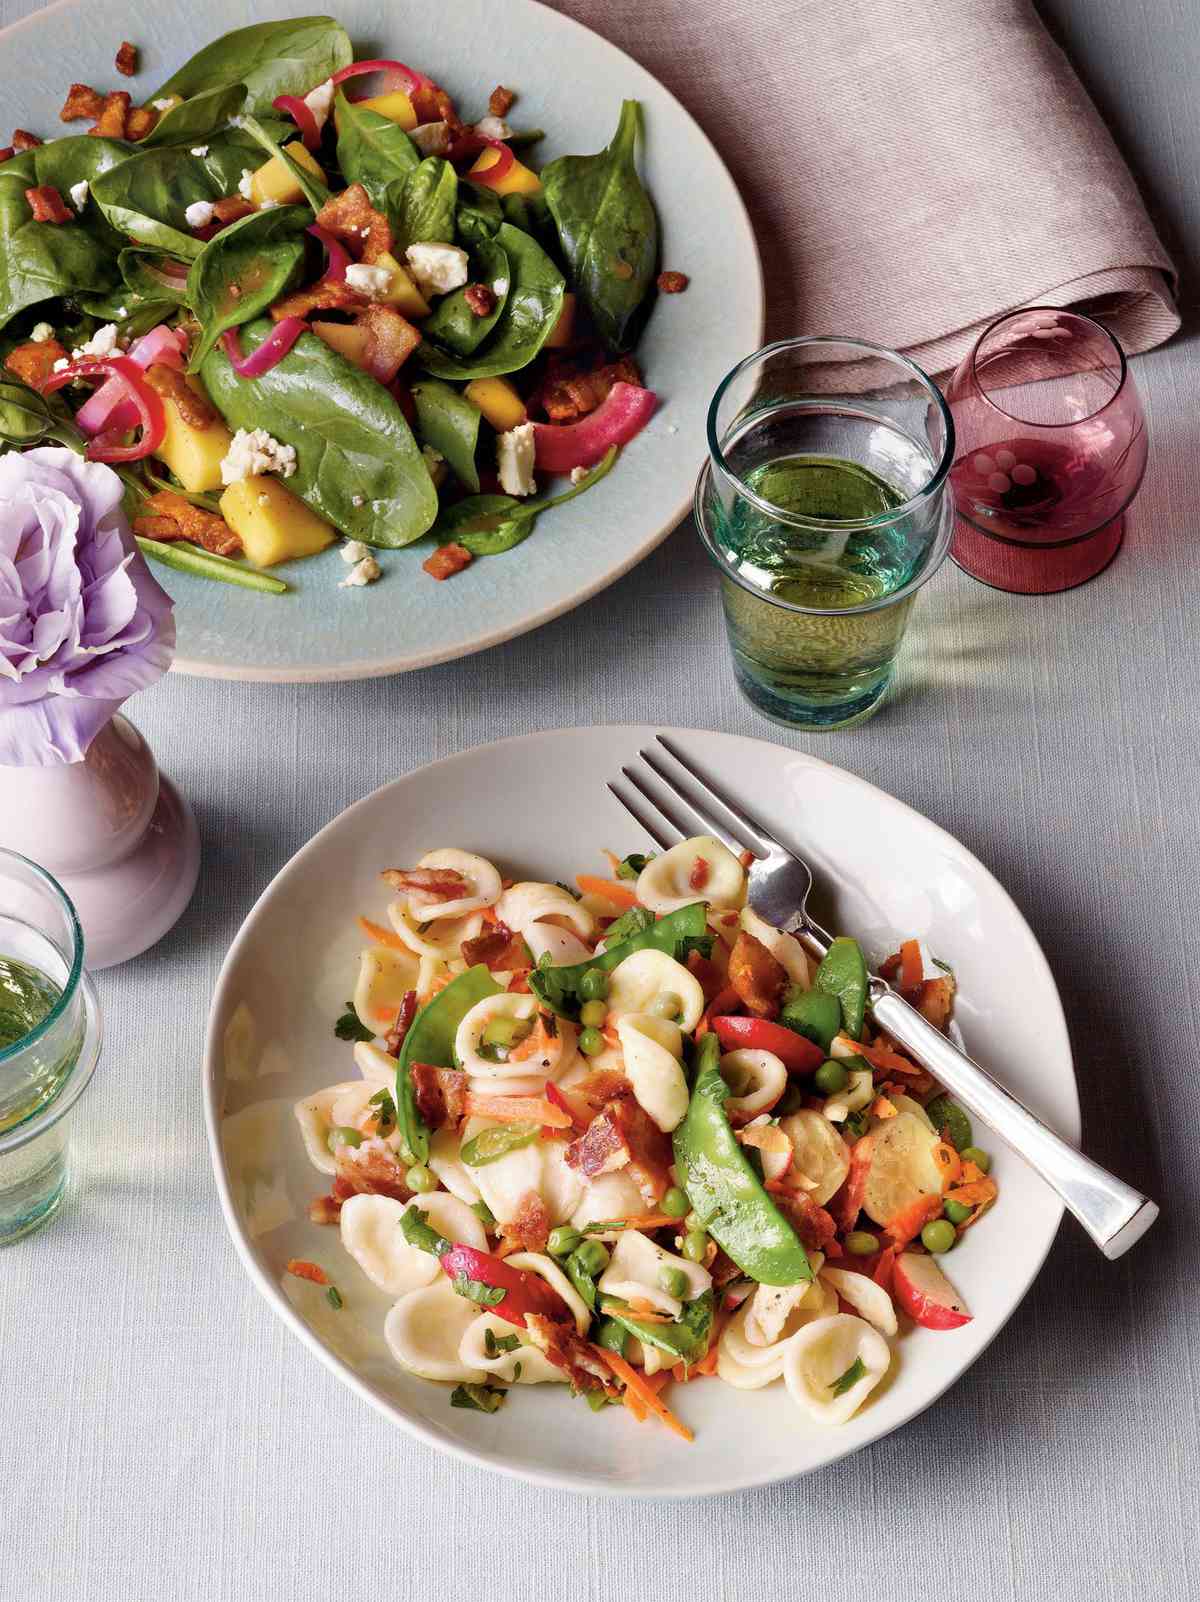 MarchMango-Spinach Salad with Bacon Vinaigrette